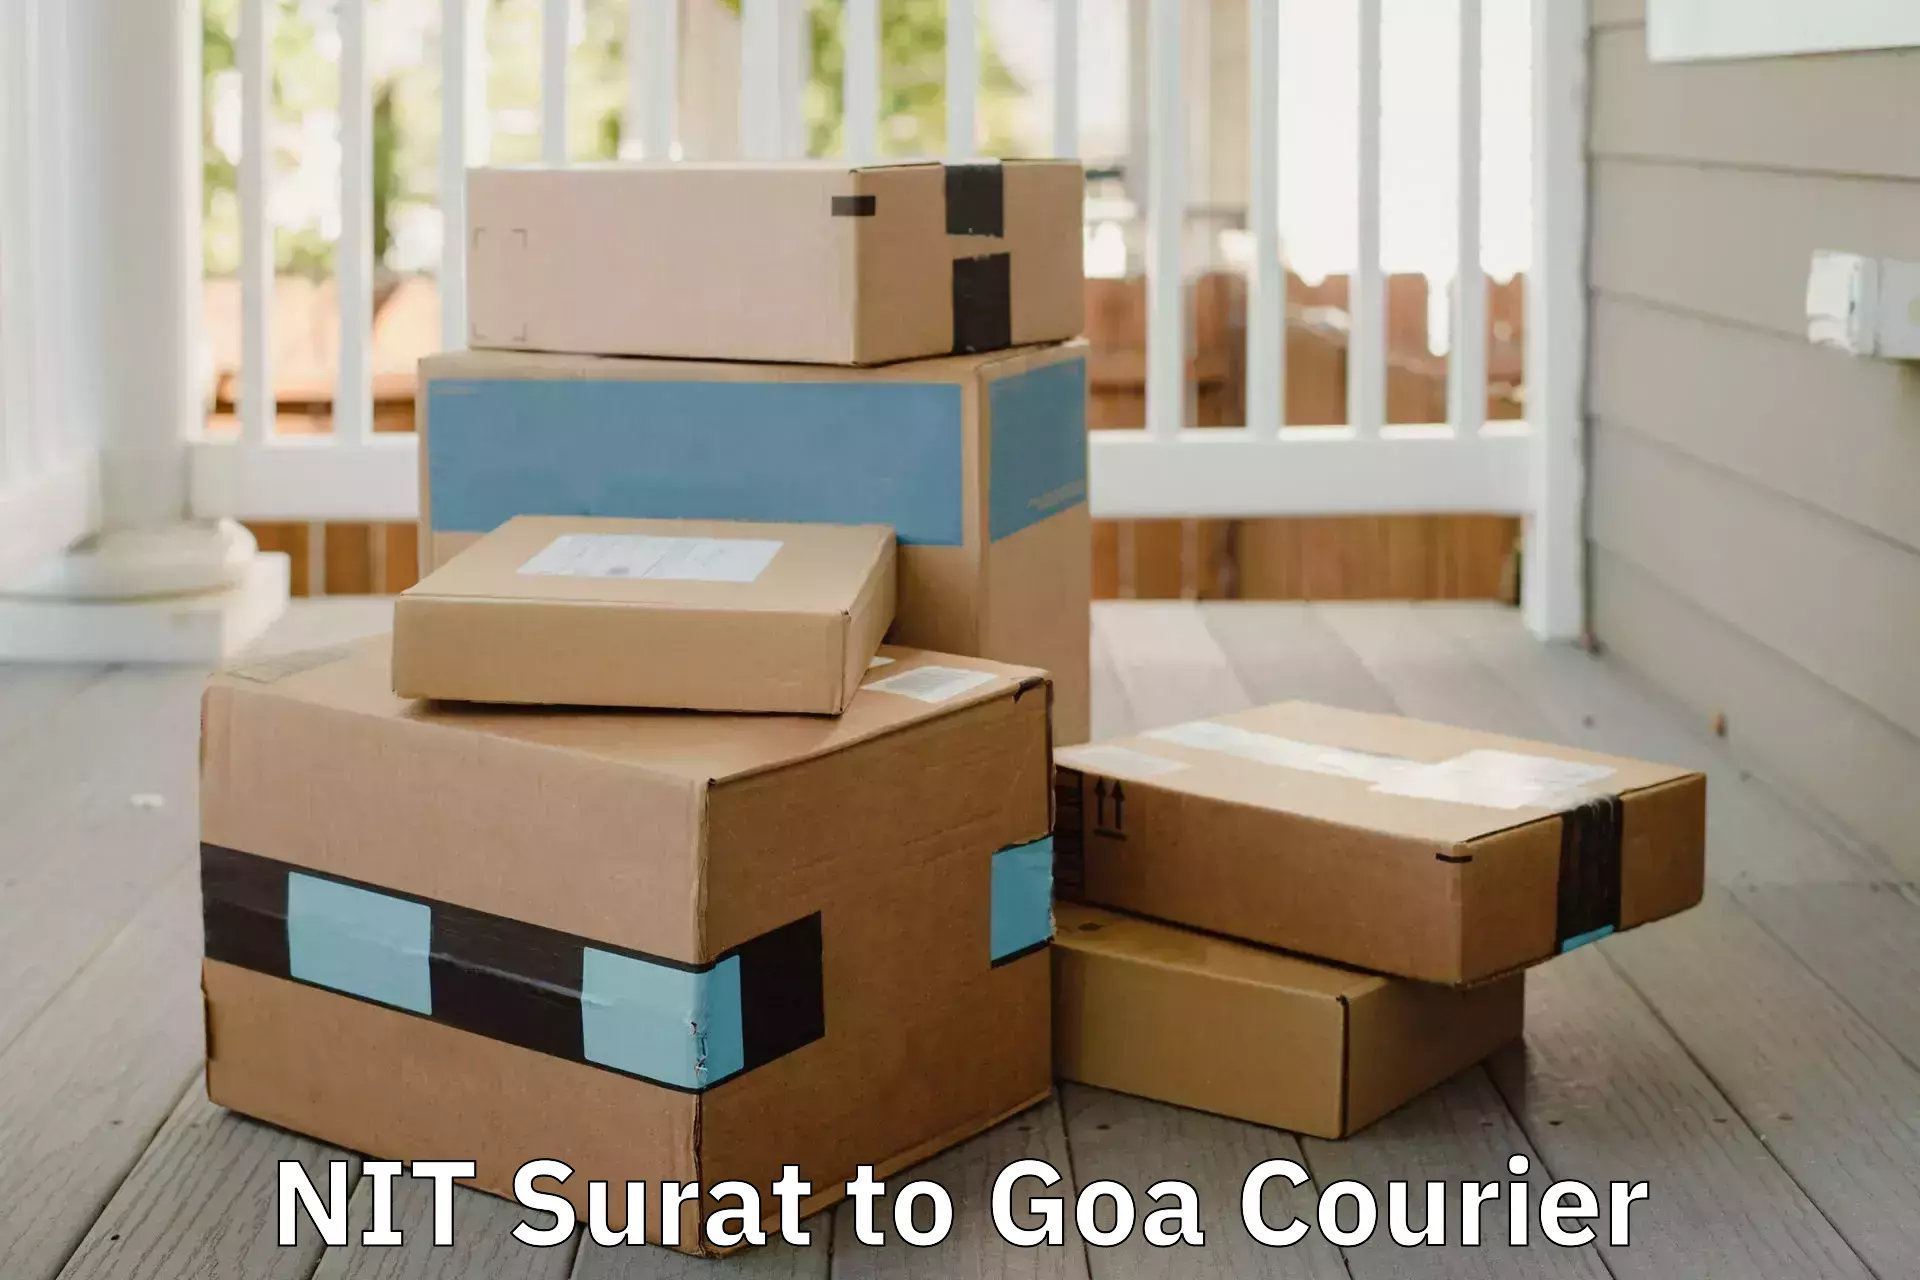 Furniture transport company NIT Surat to South Goa